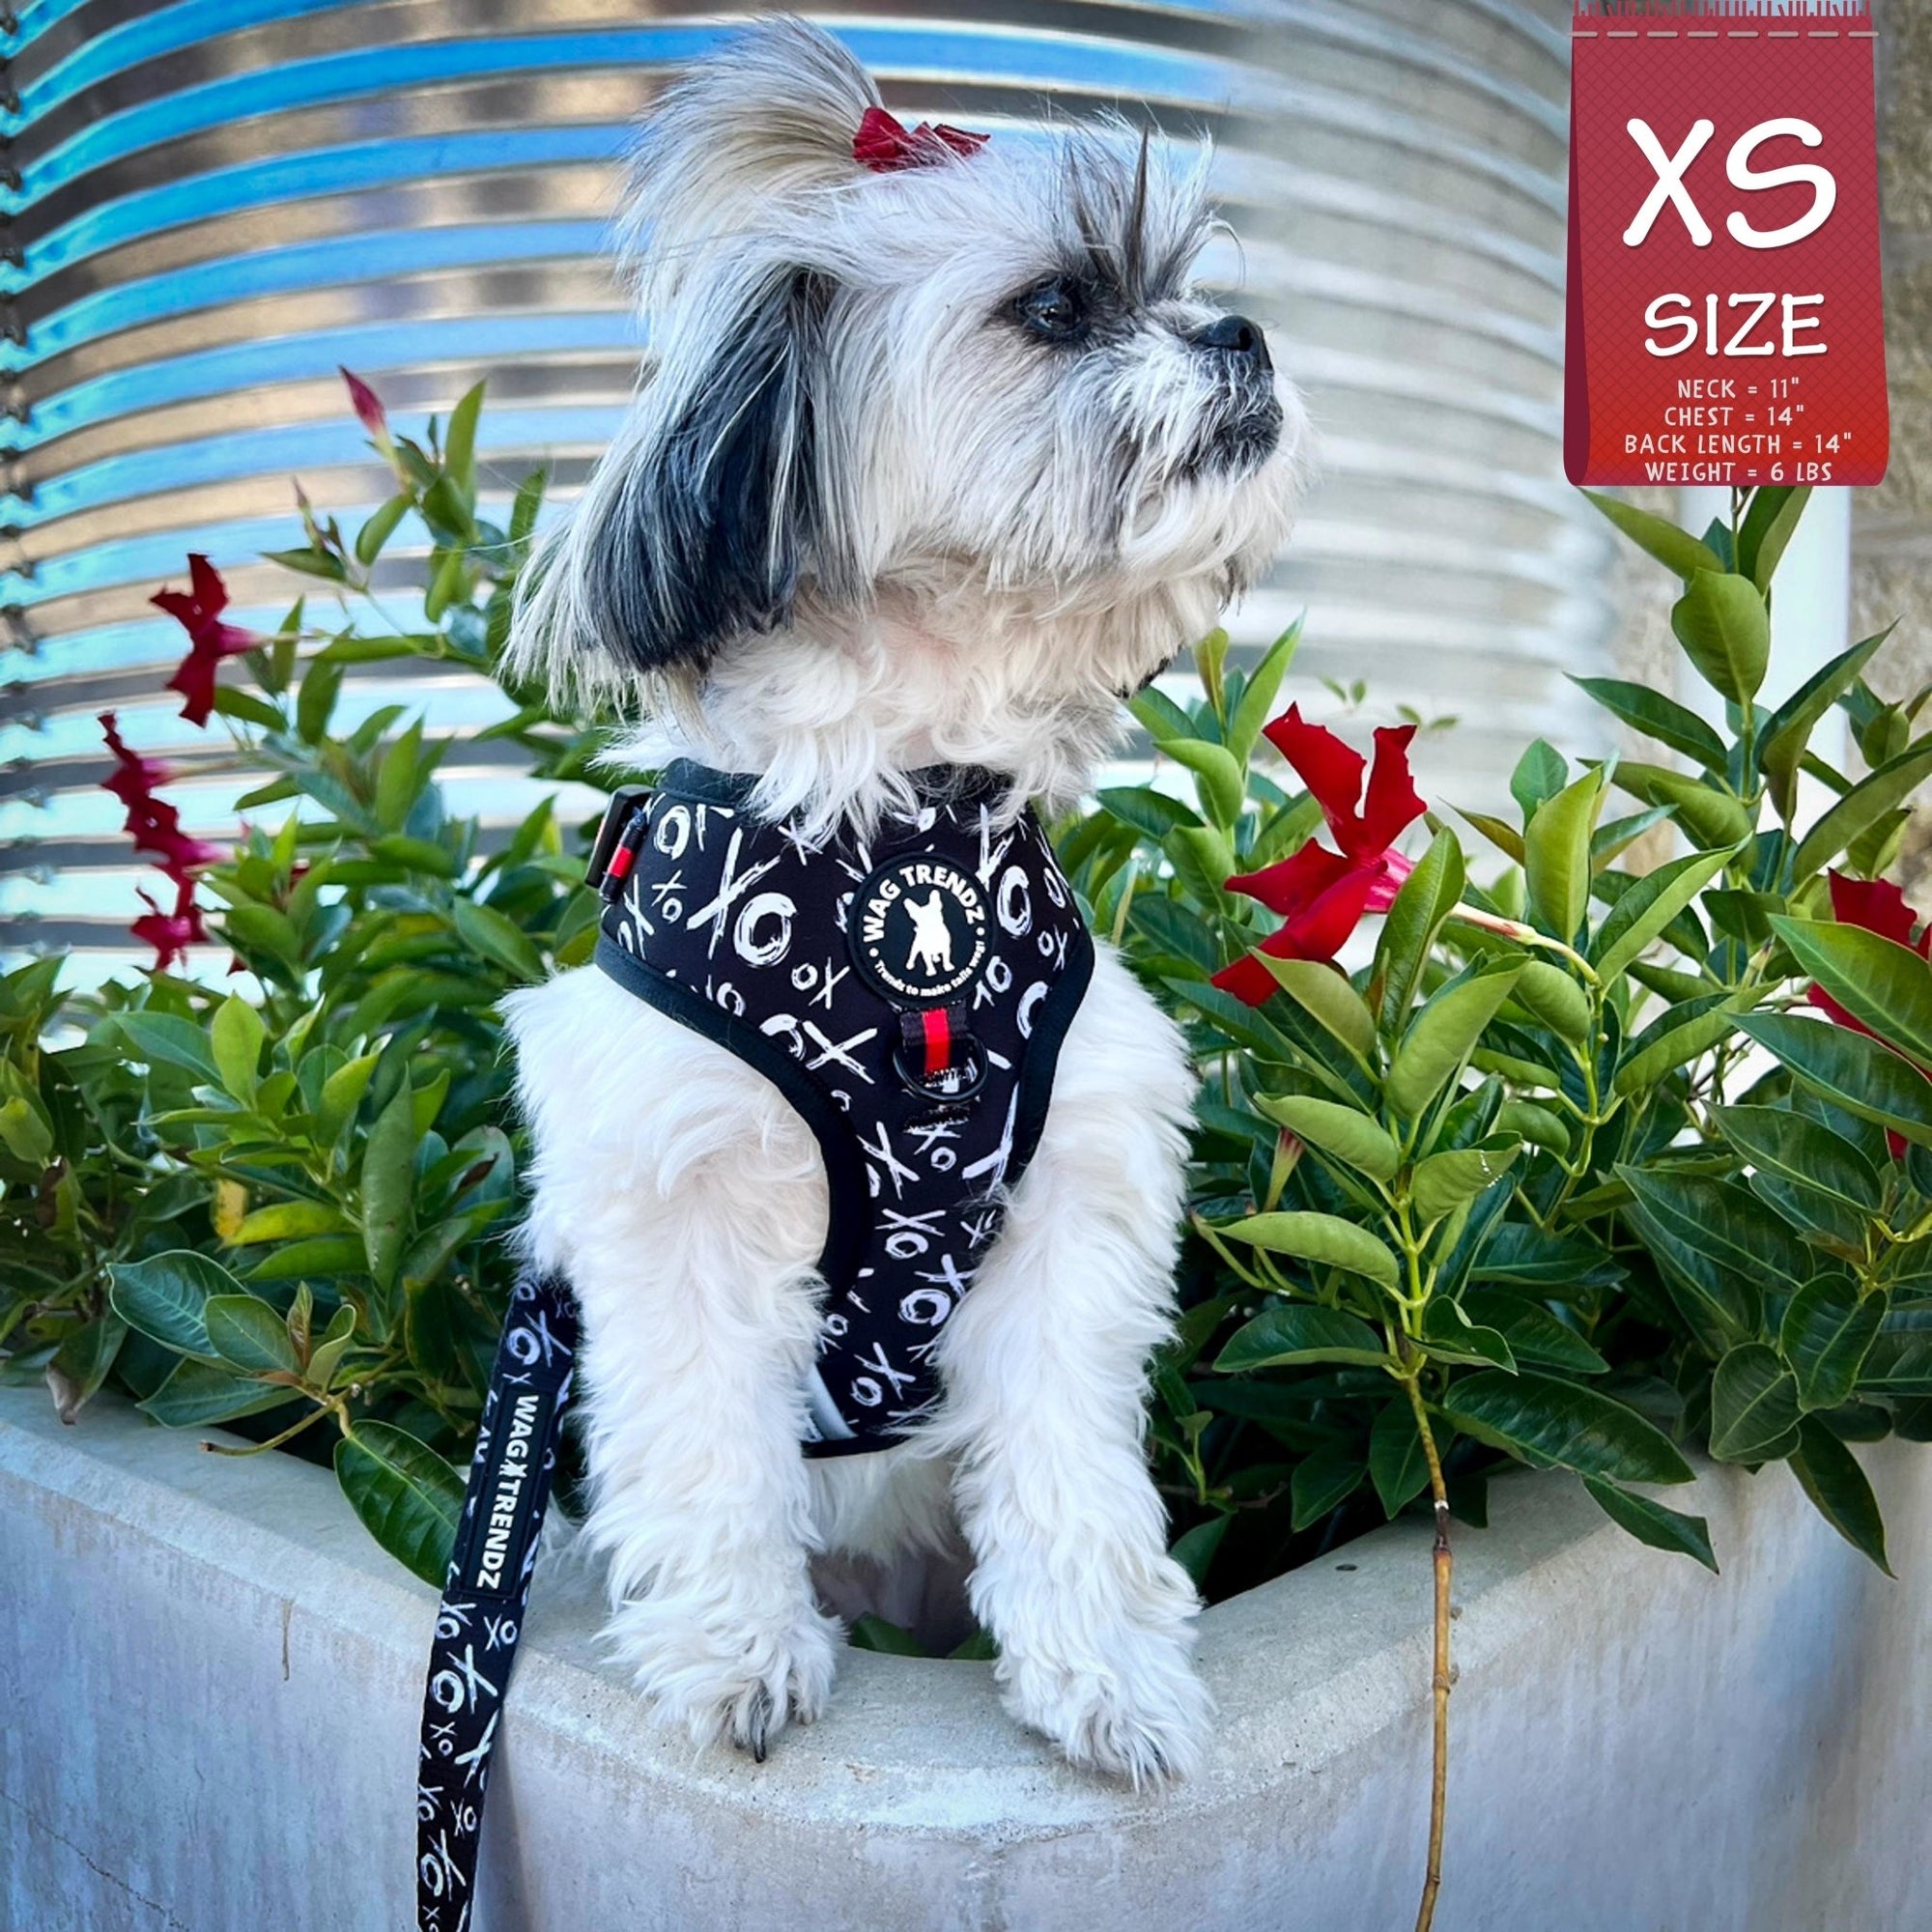 Dog Leash and Harness Set - Shih Tzu mix wearing XS Dog Harness Vest with black and white XO&#39;s with bold red accents and matching leash attached - standing outdoors with red and green flowers in front of metal silos - Wag Trendz